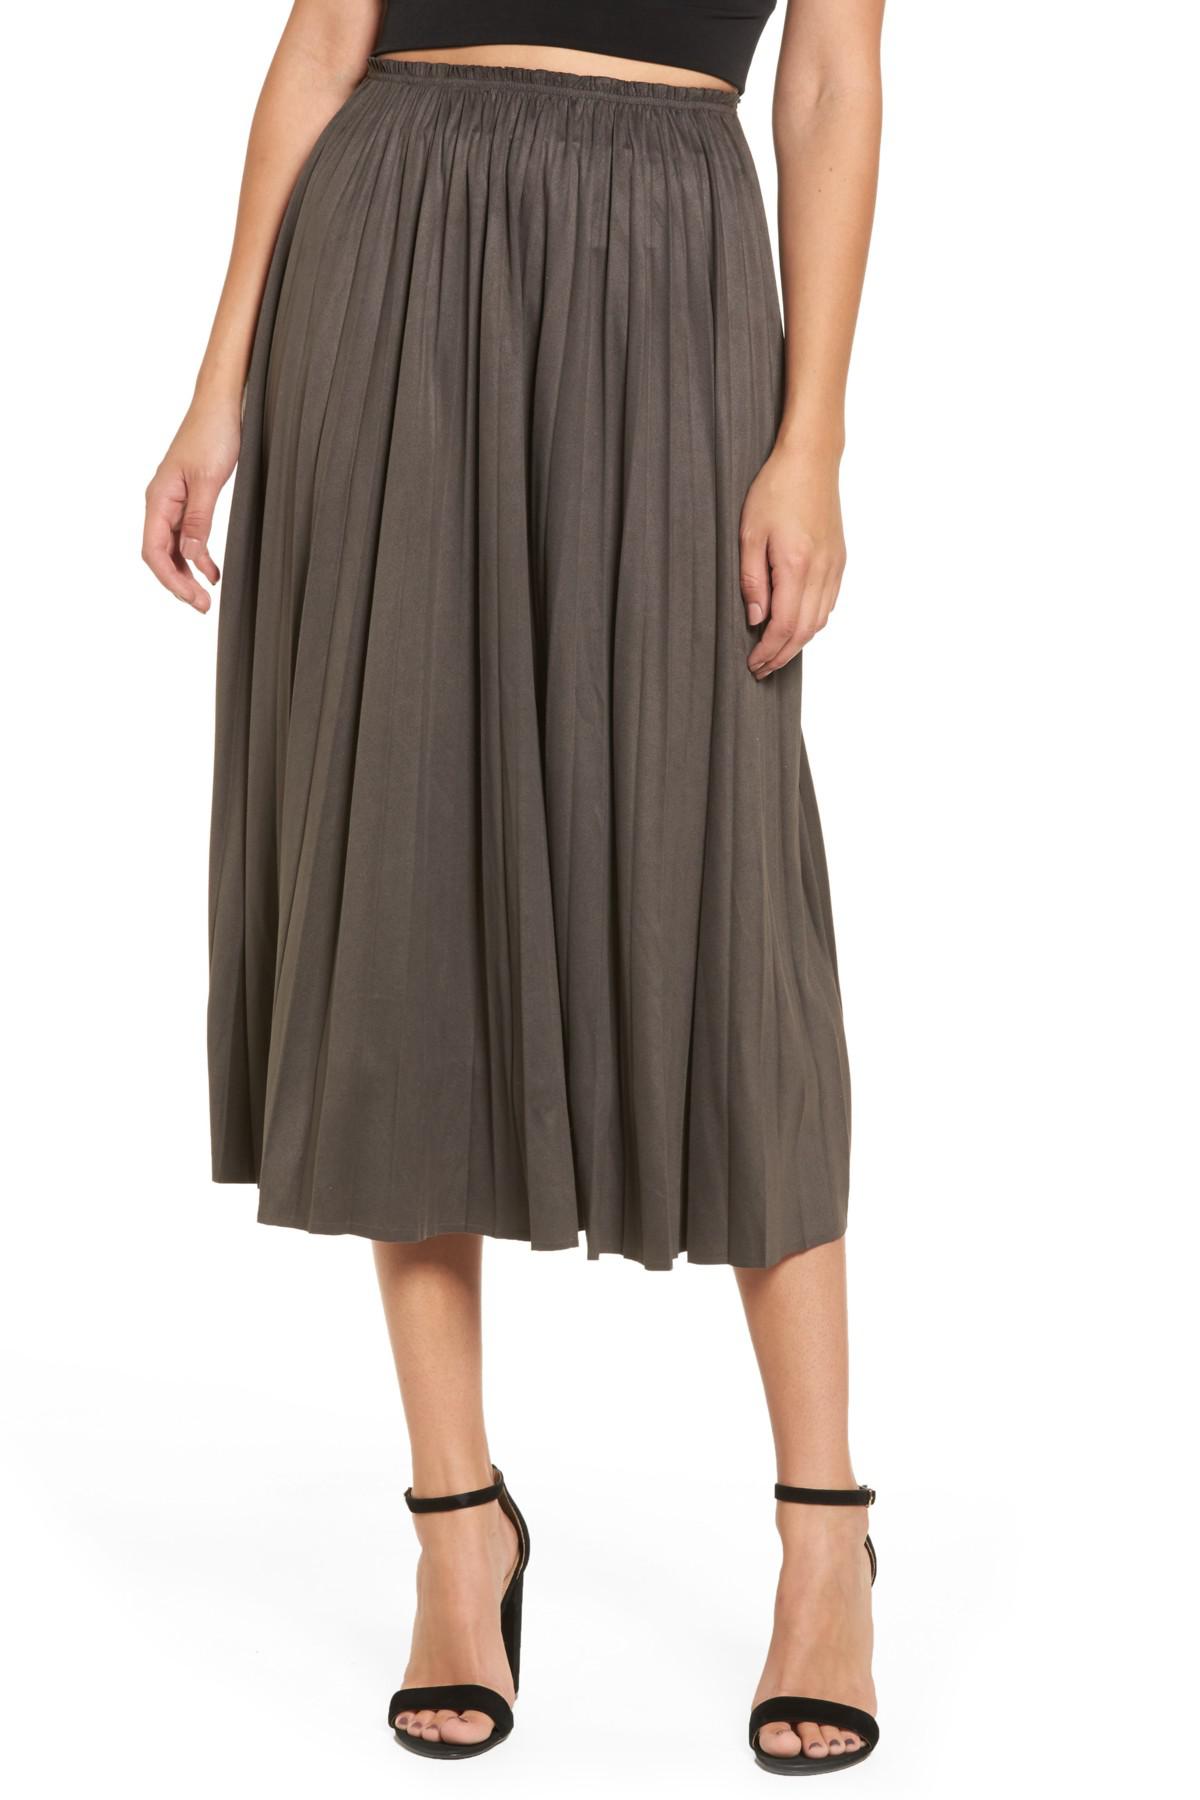 Lyst - Moon River Pleated Faux Suede Midi Skirt in Green